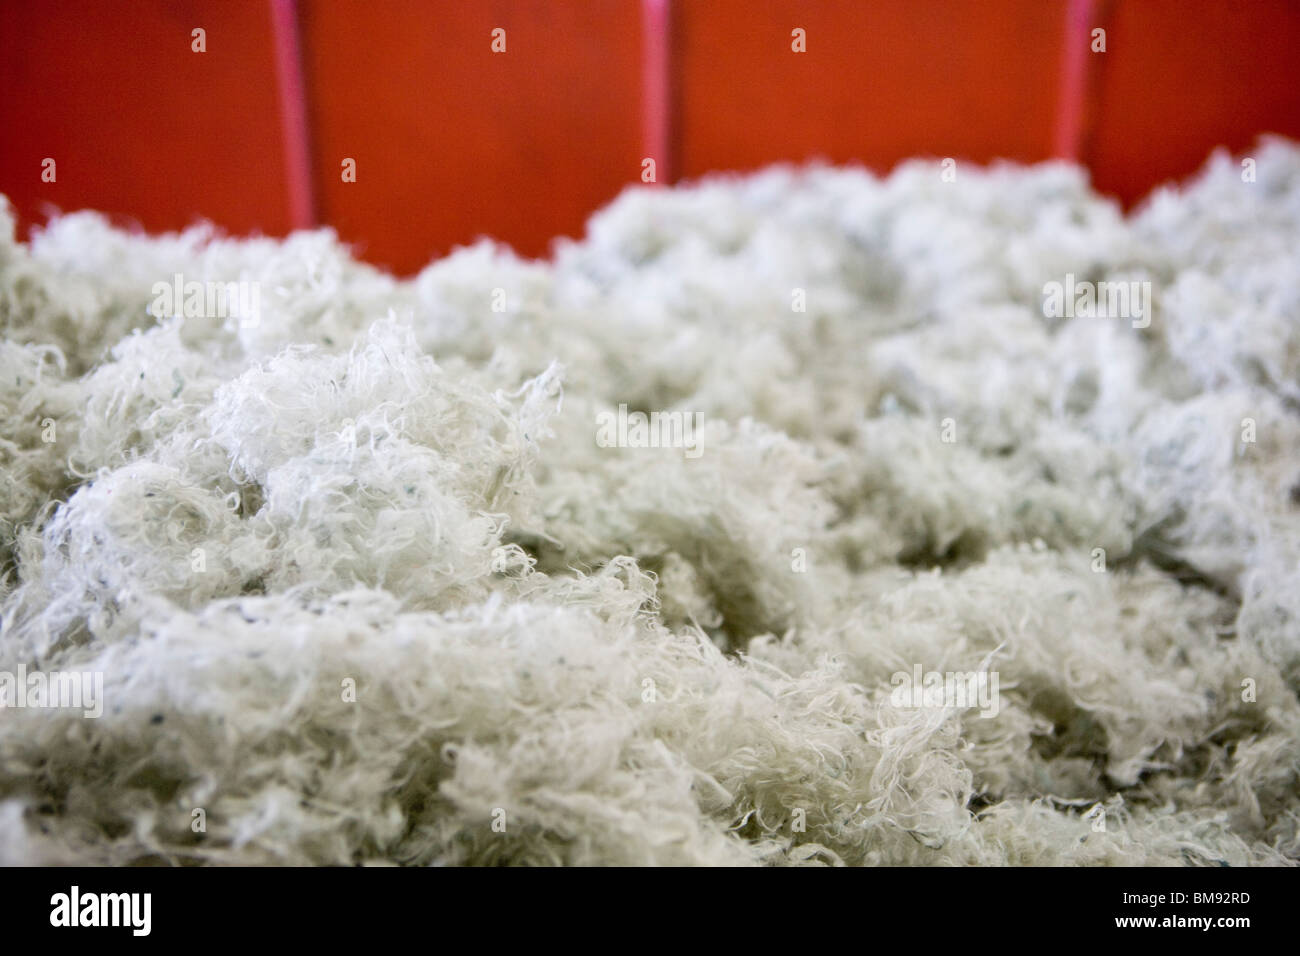 Polyester fibers obtained after PVC sheeting has been crushed and recycled Stock Photo